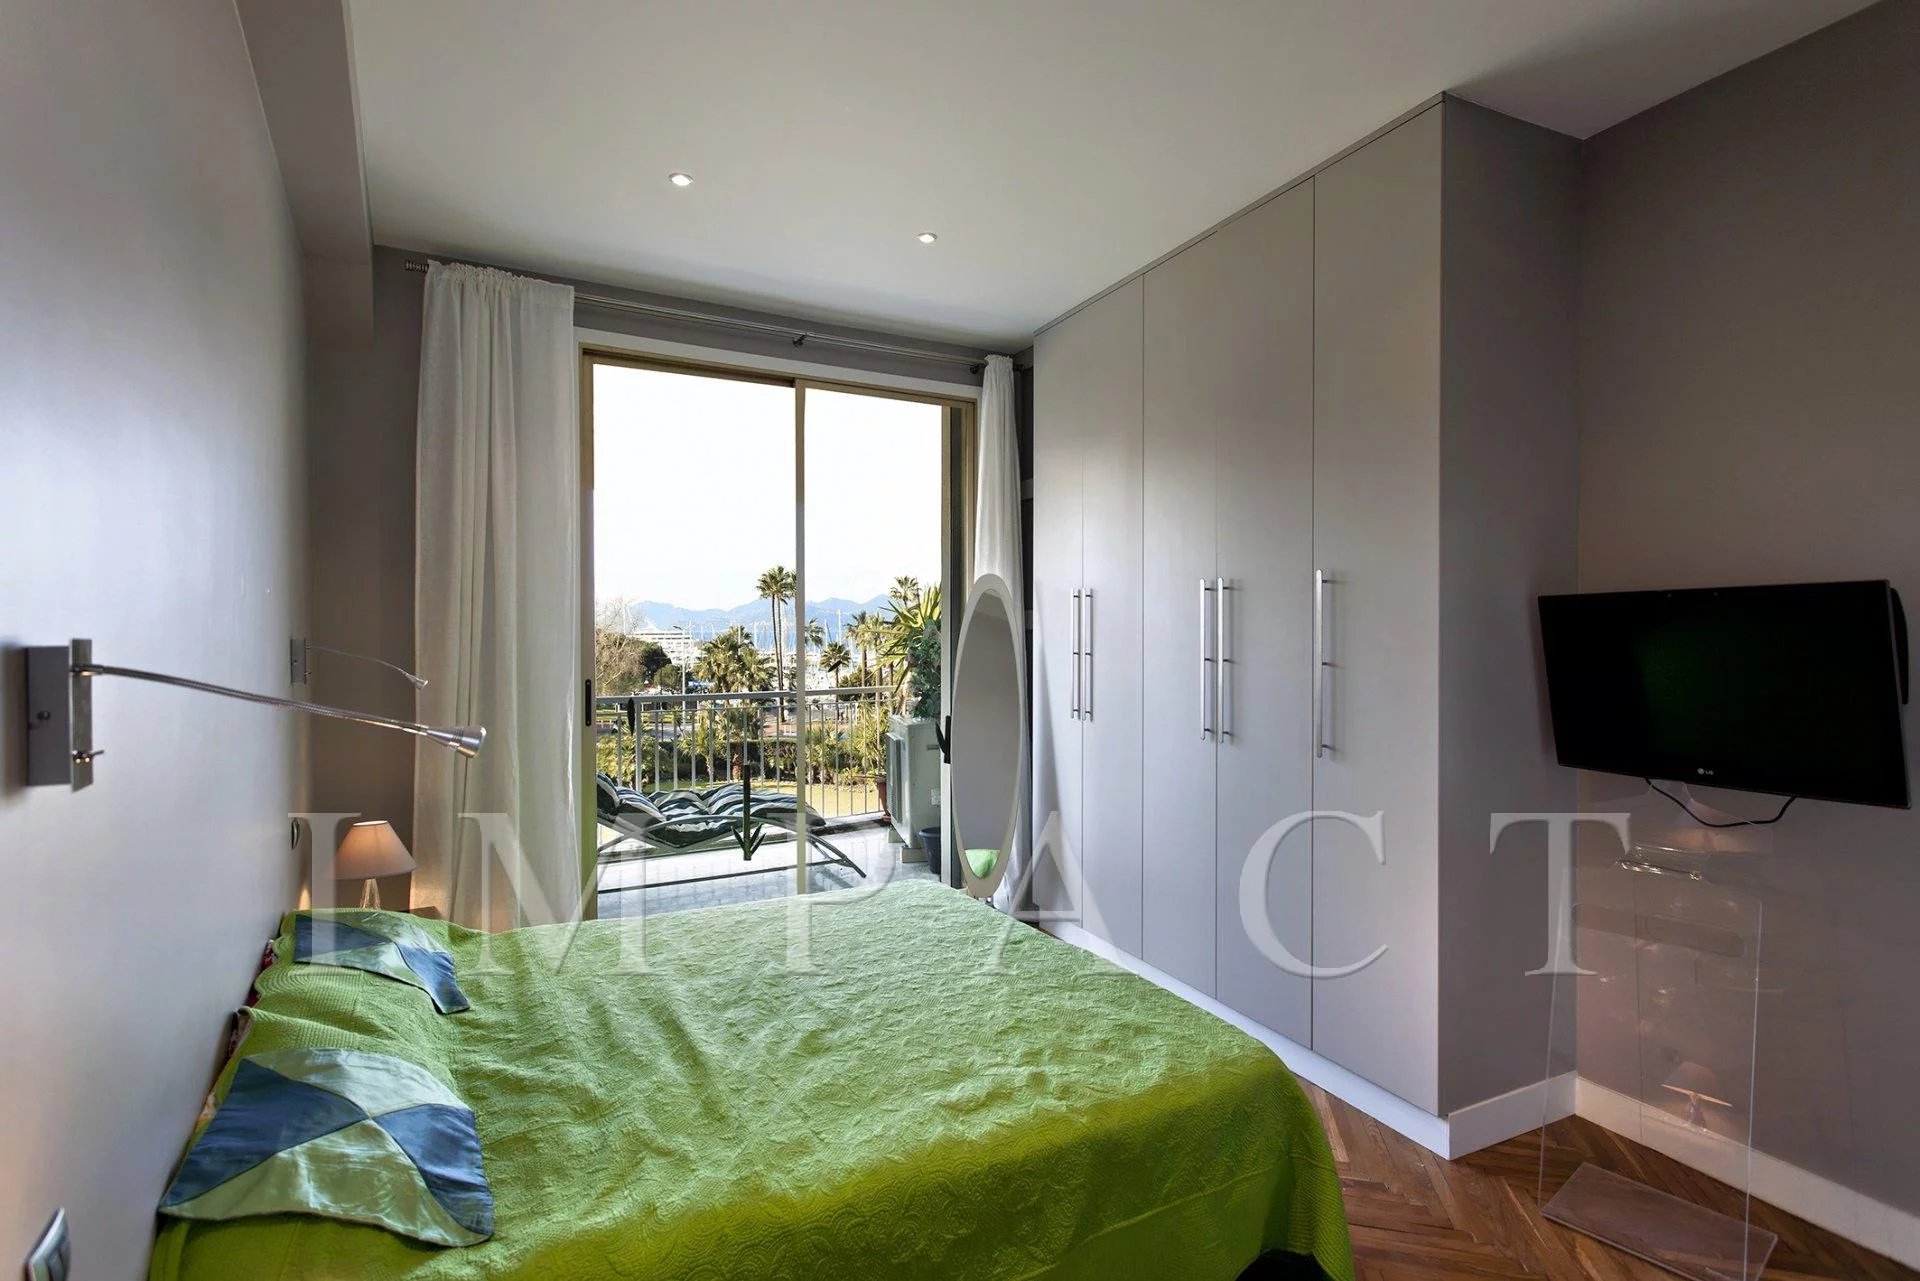 Apartment to rent on the Croisette, Cannes